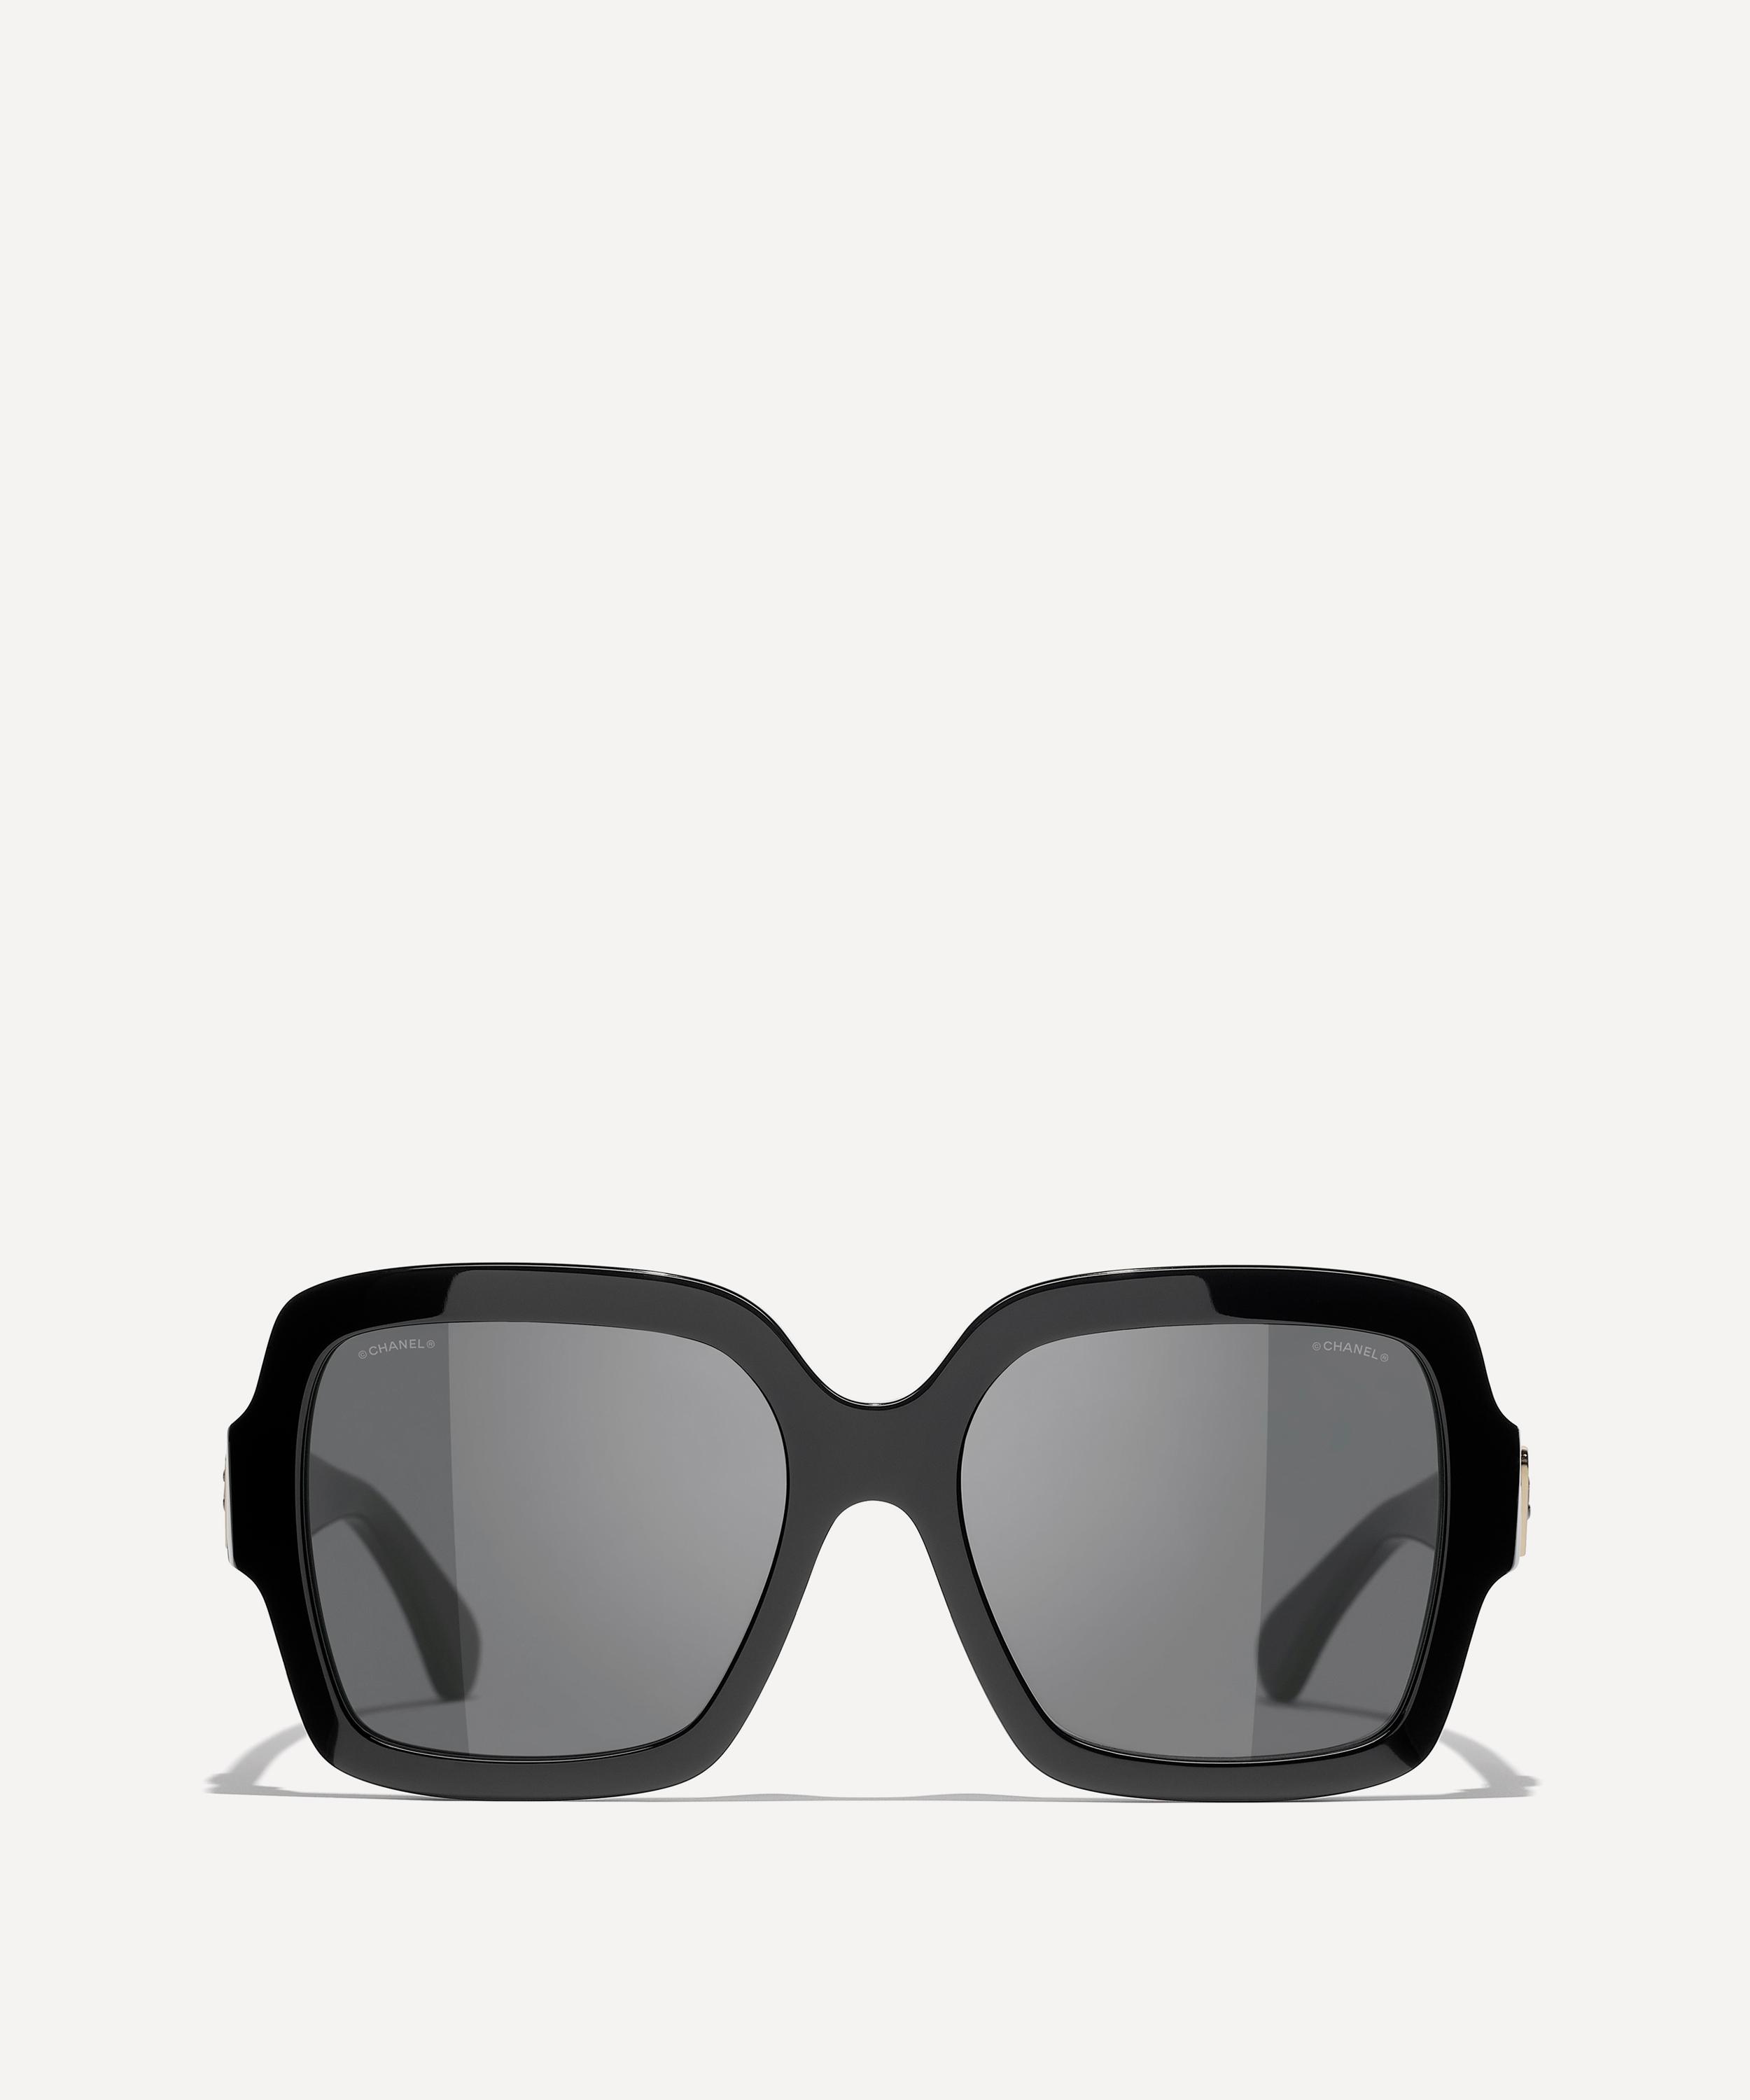 Shop CHANEL 2022 SS Unisex Square Oversized Sunglasses by kiaraninth